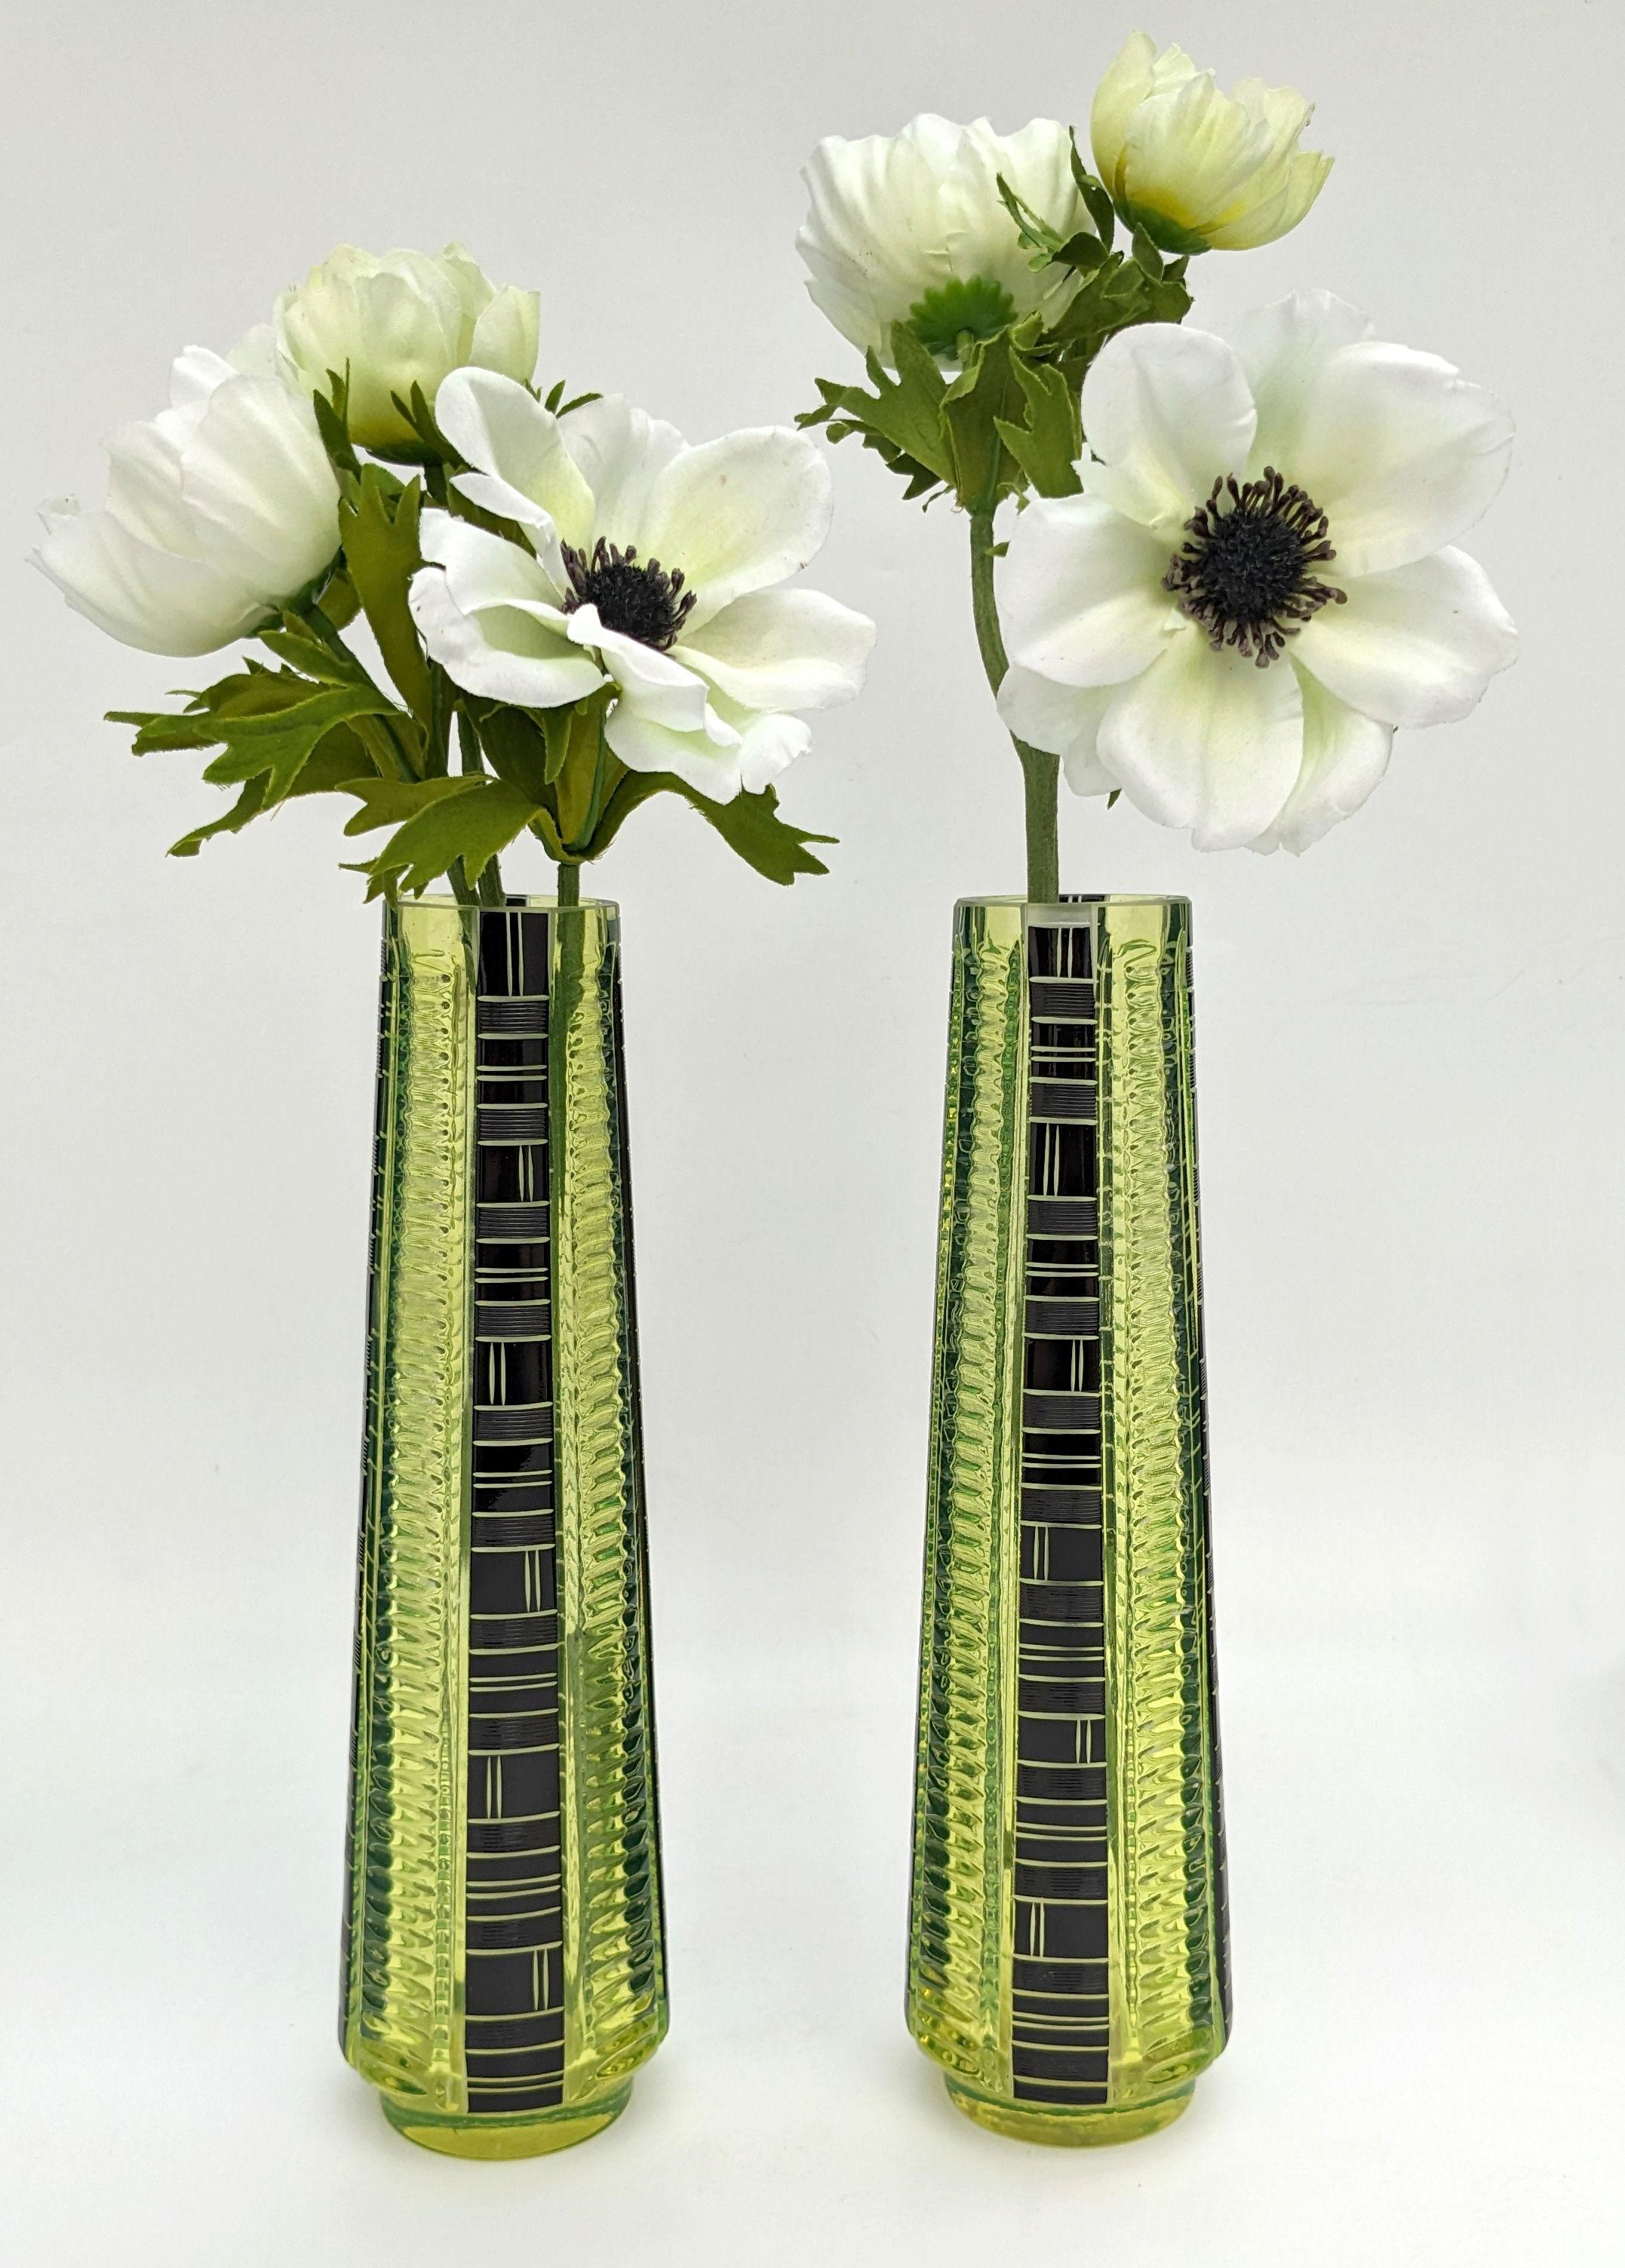 Art Deco Pair Of Tall Uranium Glass Vases By Karl Palda, c1930 For Sale 4